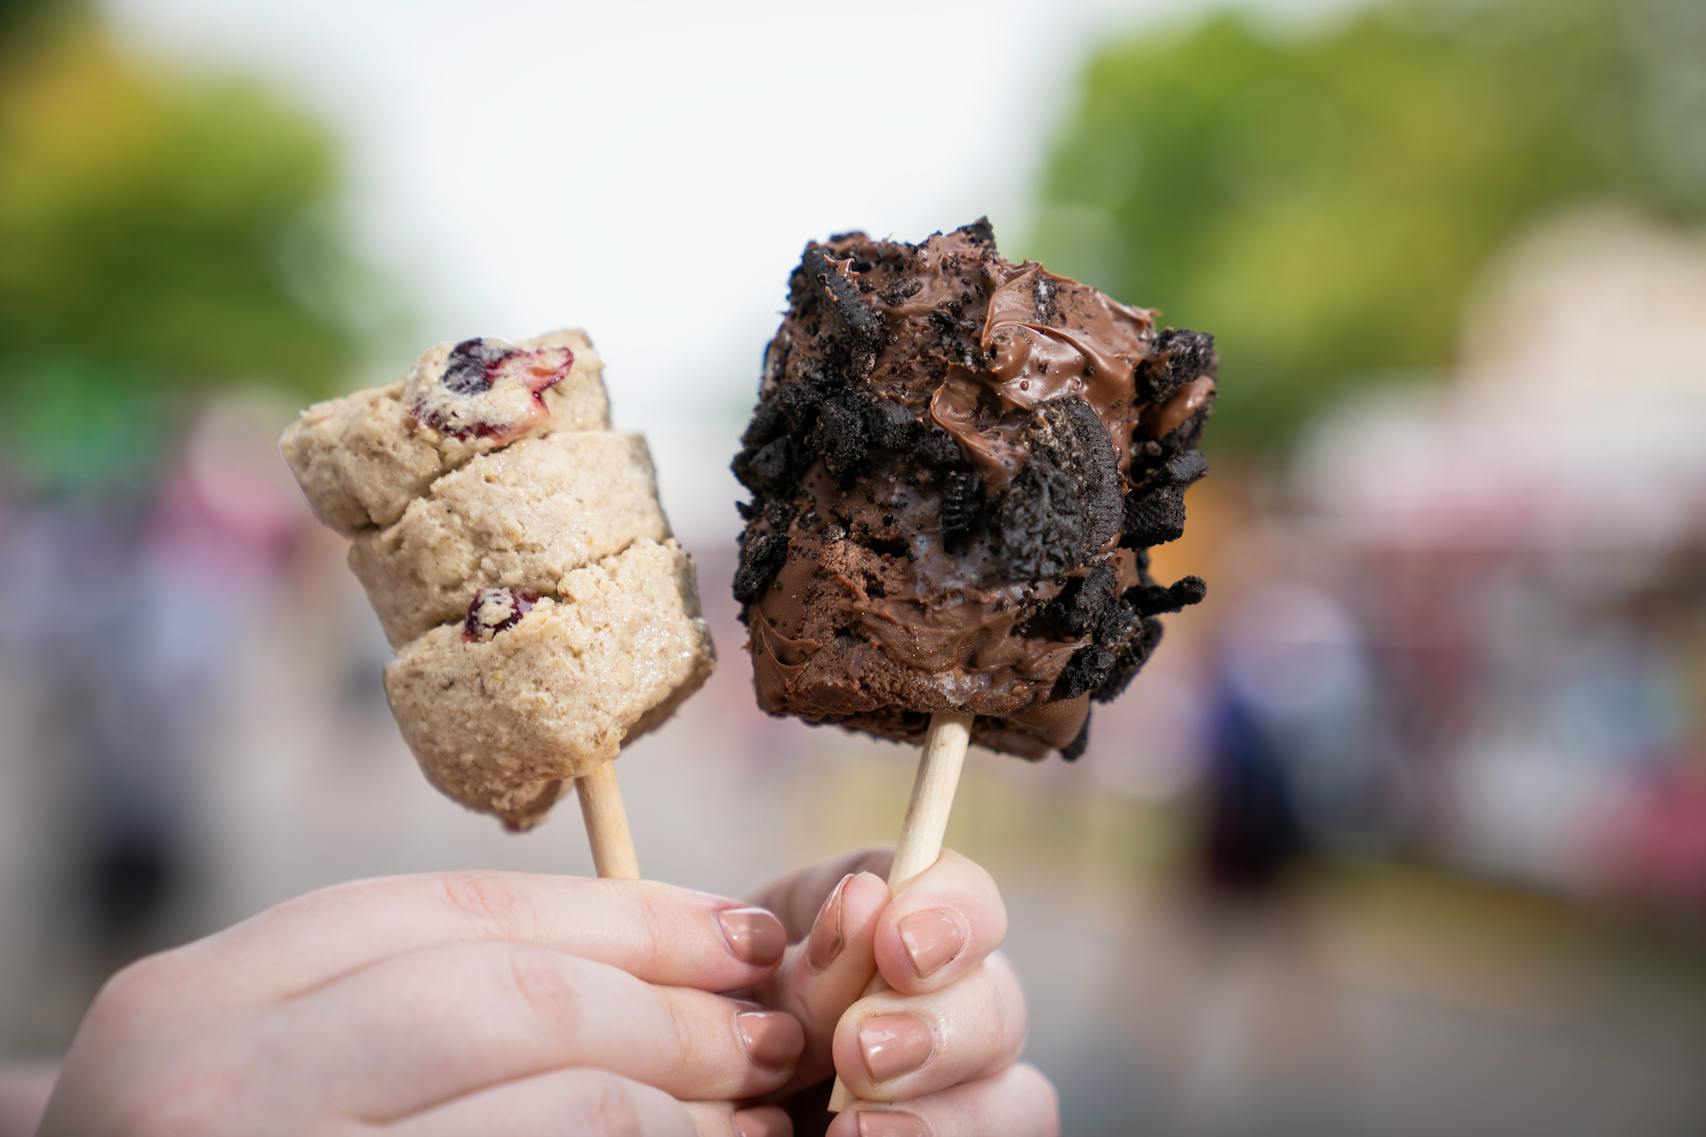 White Chocolate Cranberry, left, and Oreo Classic from Kora’s Cookie Dough The new foods of the 2023 Minnesota State Fair photographed on the first day of the fair in Falcon Heights, Minn. on Tuesday, Aug. 8, 2023. ] LEILA NAVIDI • leila.navidi@startribune.com